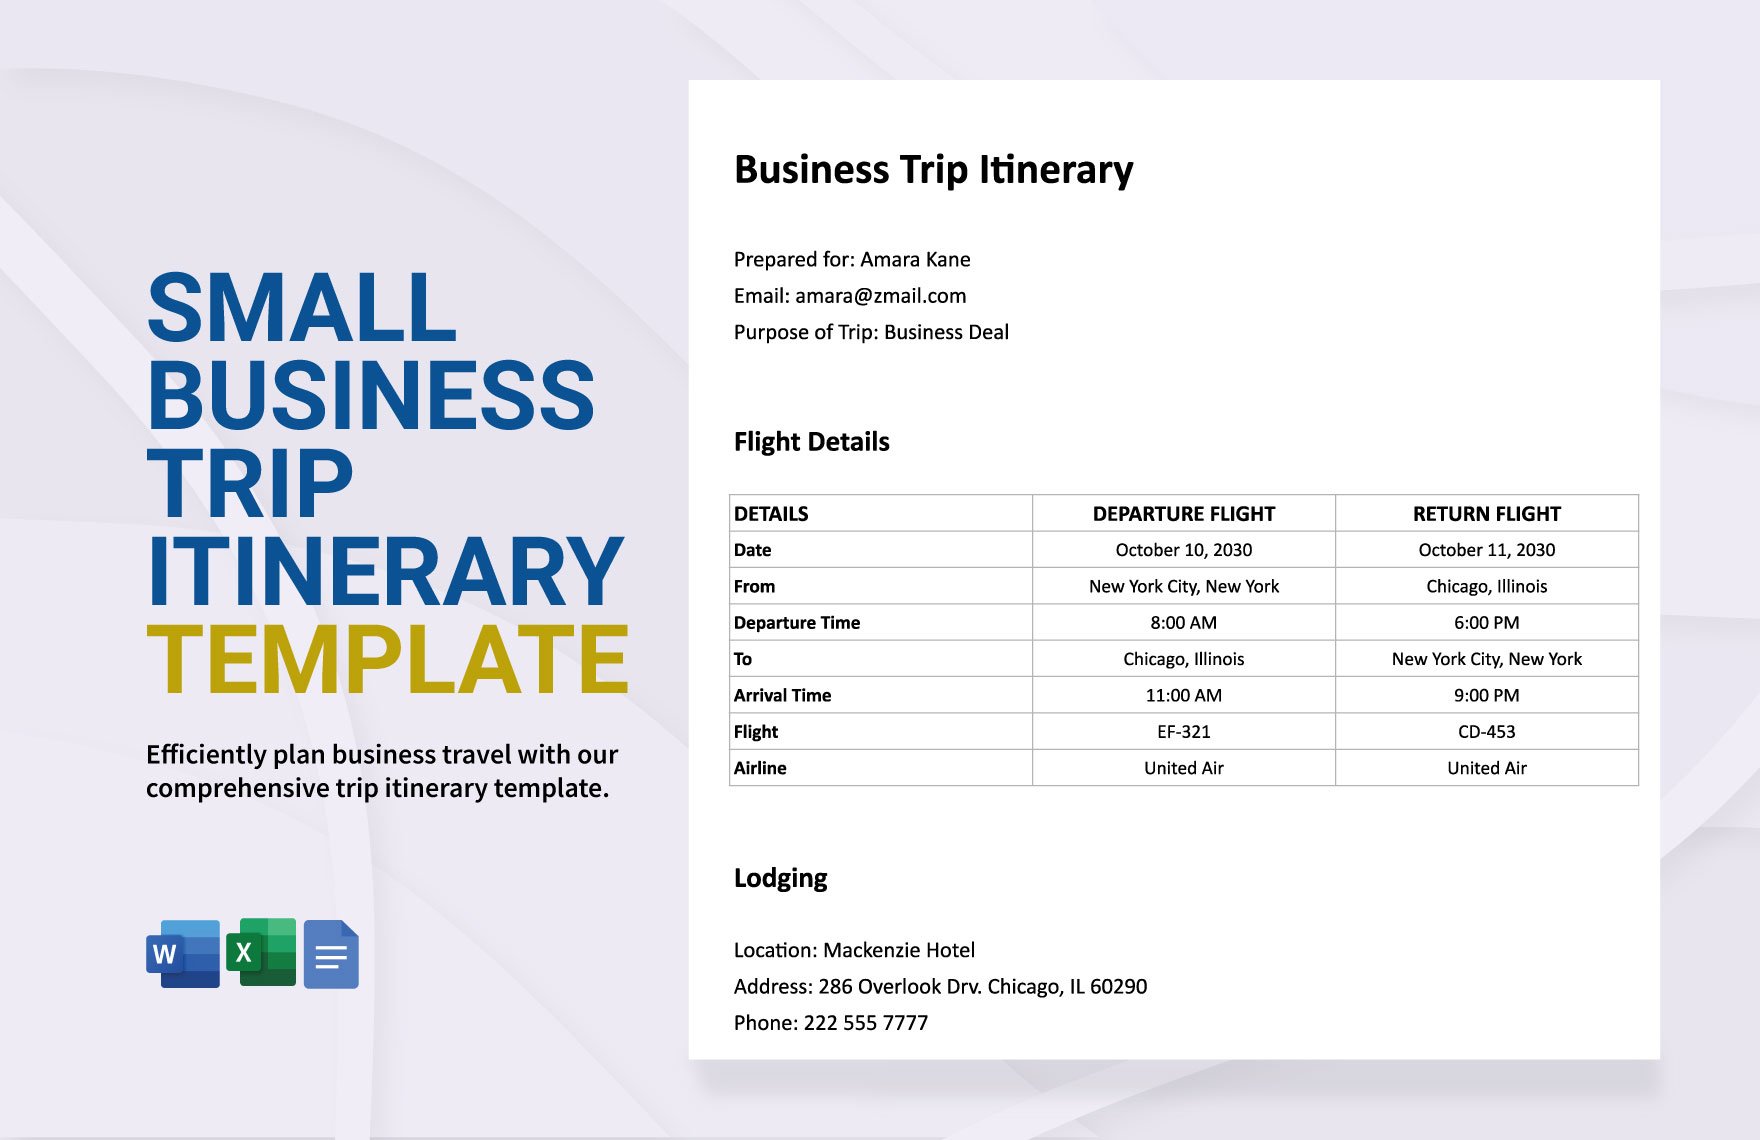 Small Business Trip Itinerary Template in Word, Google Docs, Google Sheets